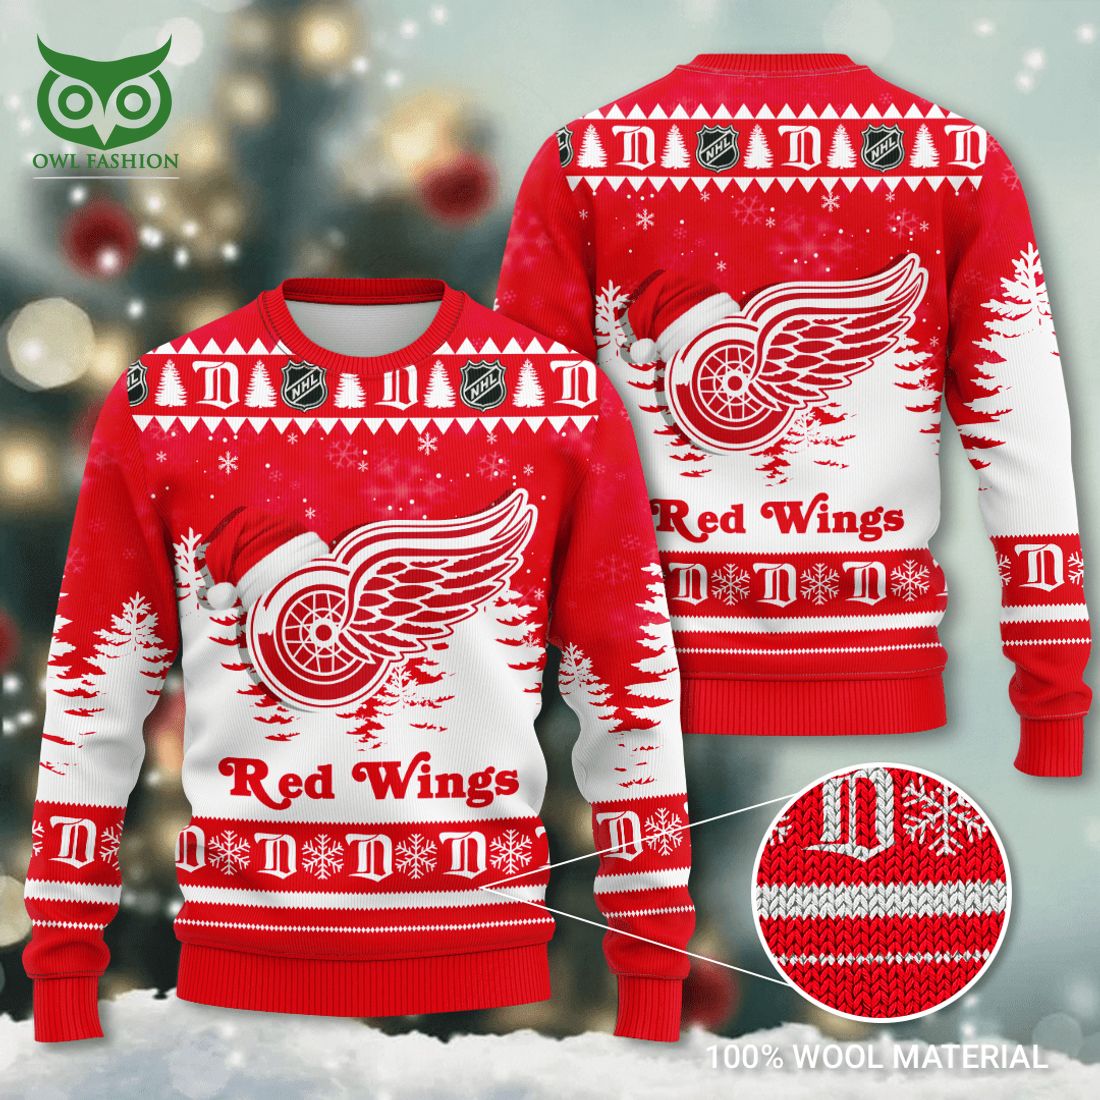 detroit red wings nhl ice hockey 3d ugly sweater 1 SUD2t